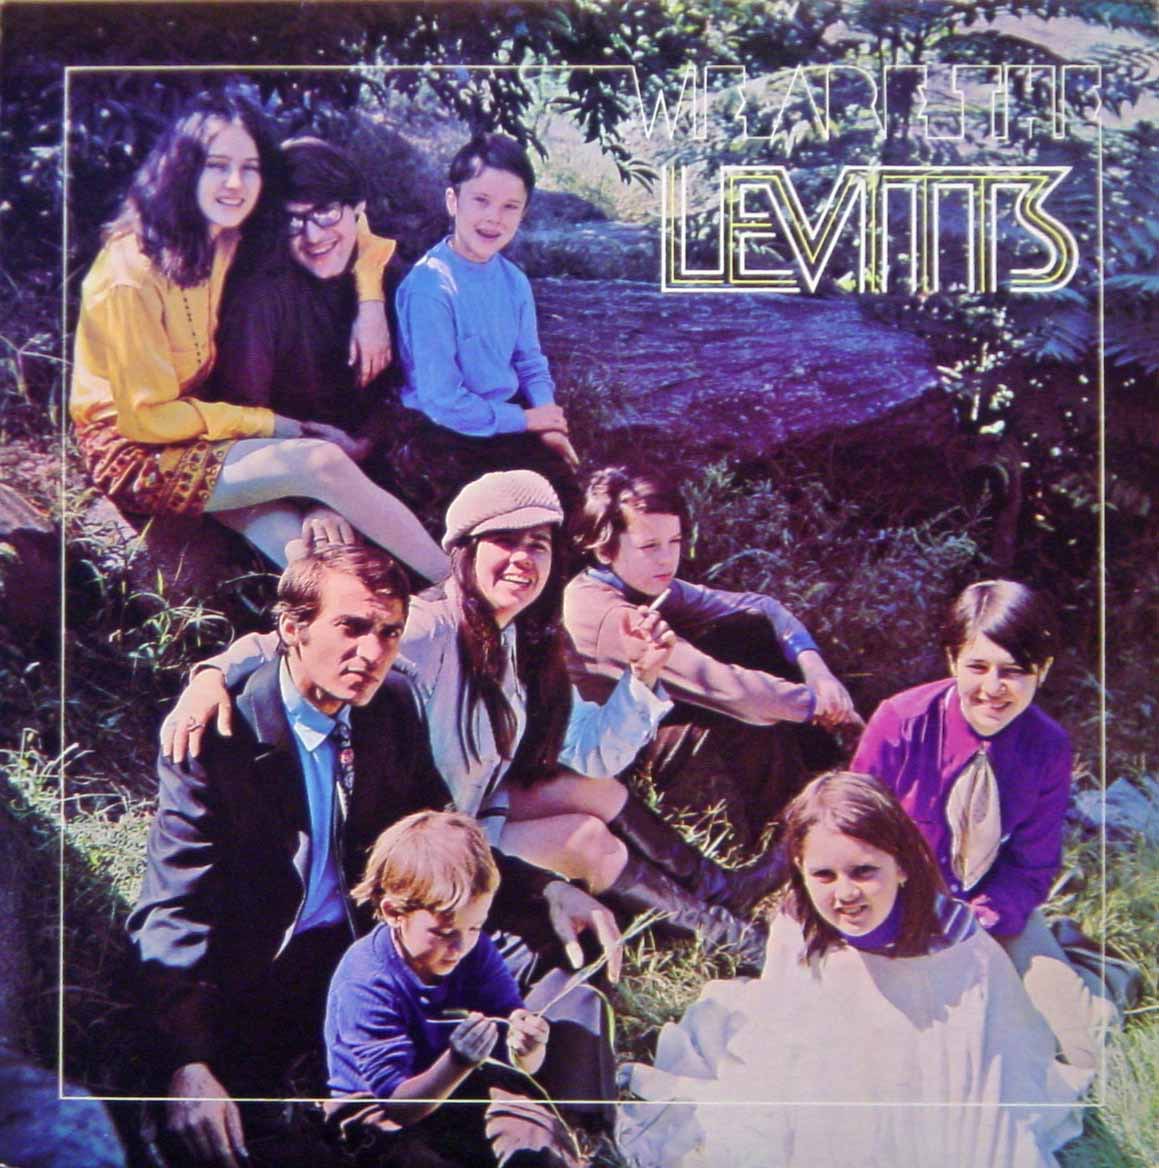 The Levitts - a family band Bernard Stollman discovered walking through Central Park. 1 of 2 bands discovered on walks through NYC parks.